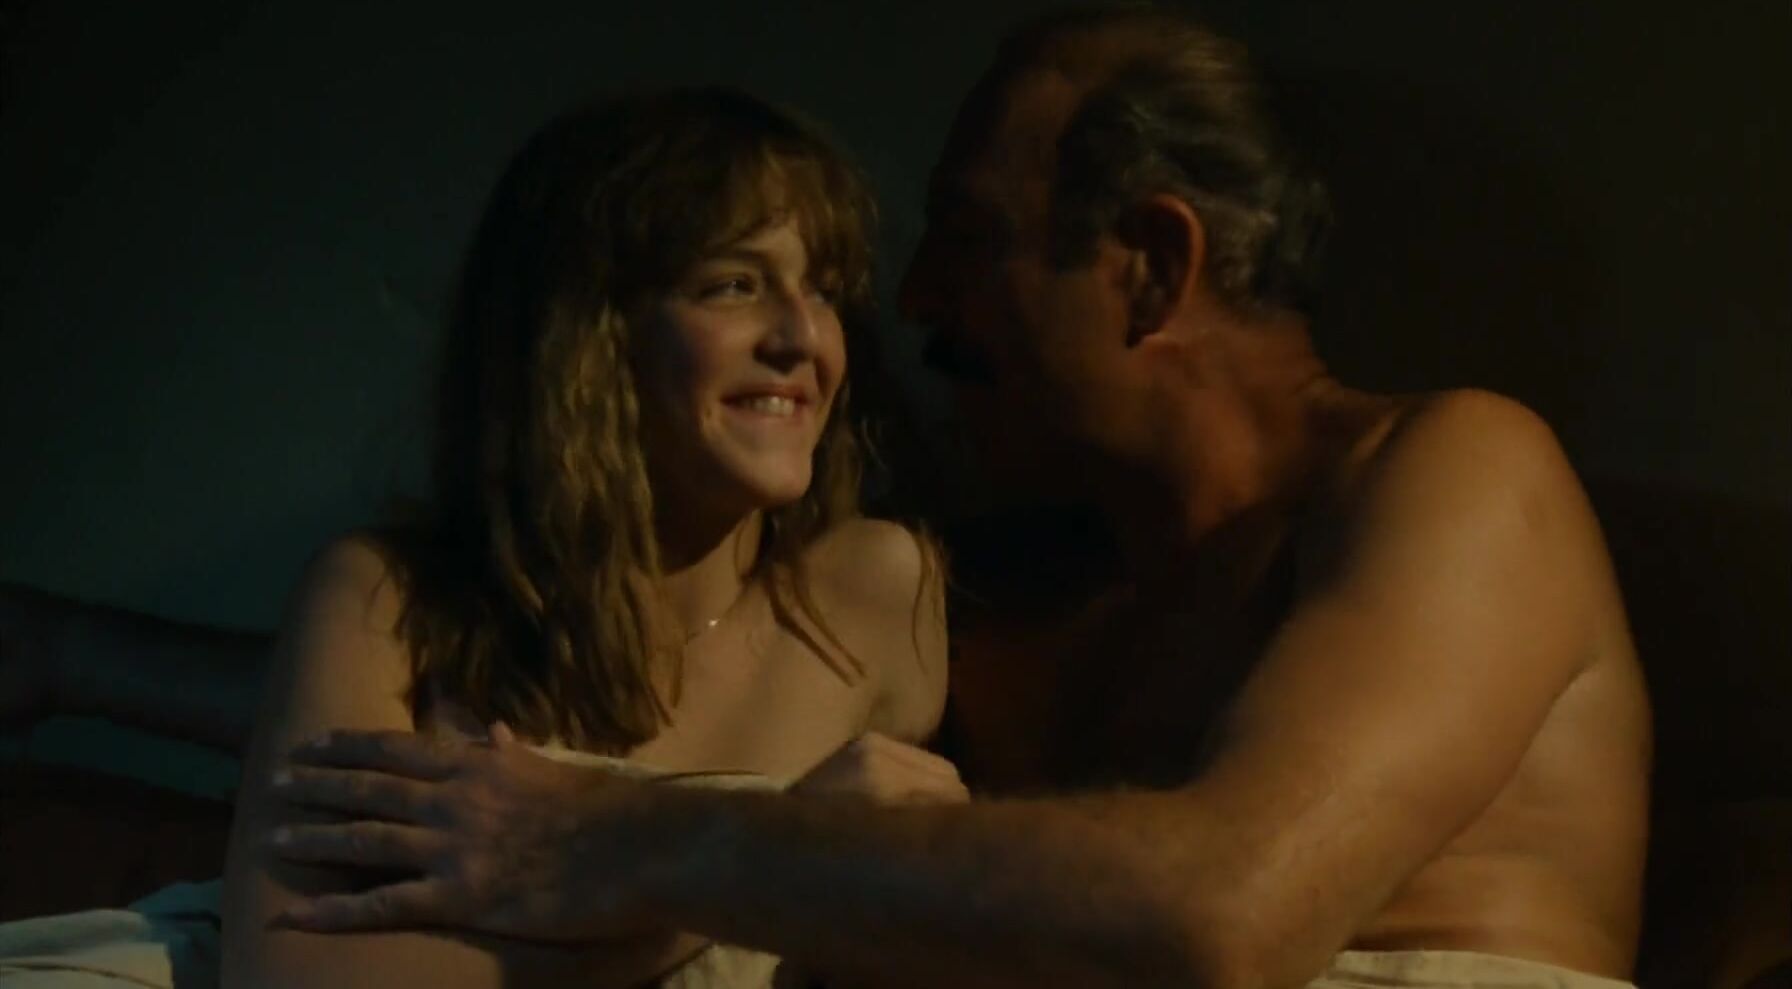 SecretShows Old guy falls in love with younger Agnes Soral in One Wild Moment sex scene (1977) Sexo